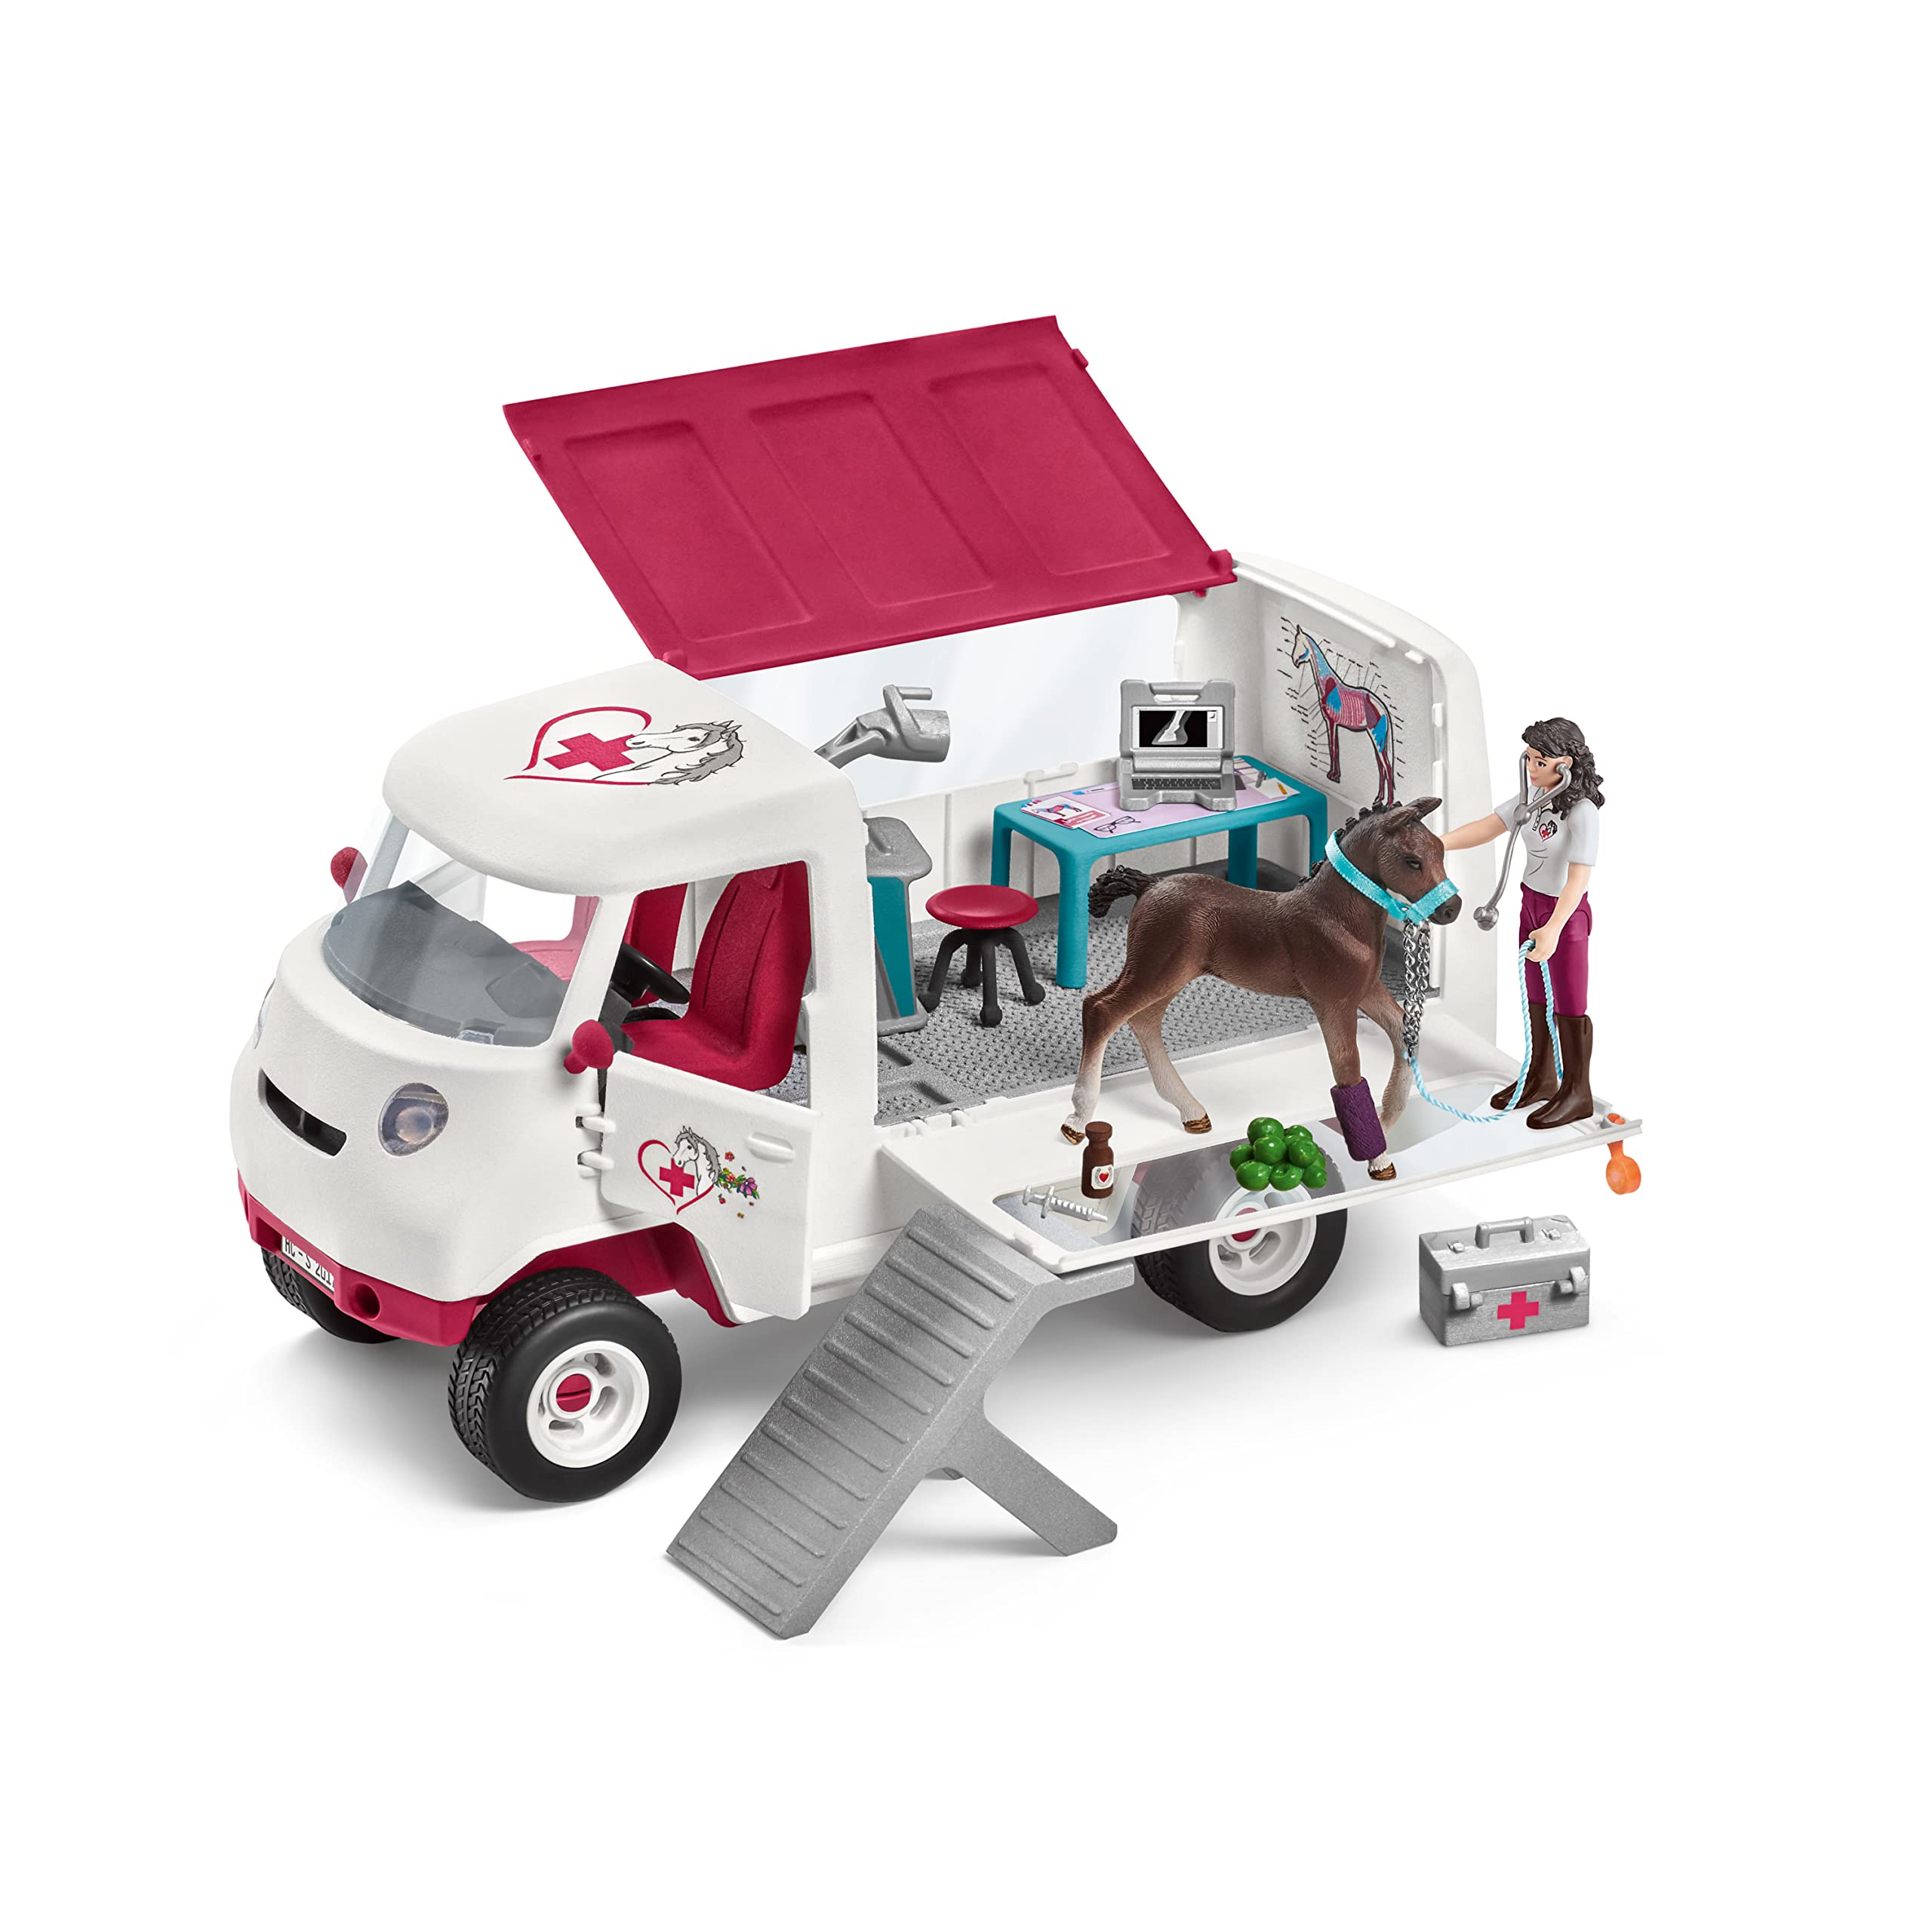 Schleich Horse Club 13-Piece Horse Toy Playset for Girls and Boys Ages 5+, Mobile Vet, Multi, (42439)